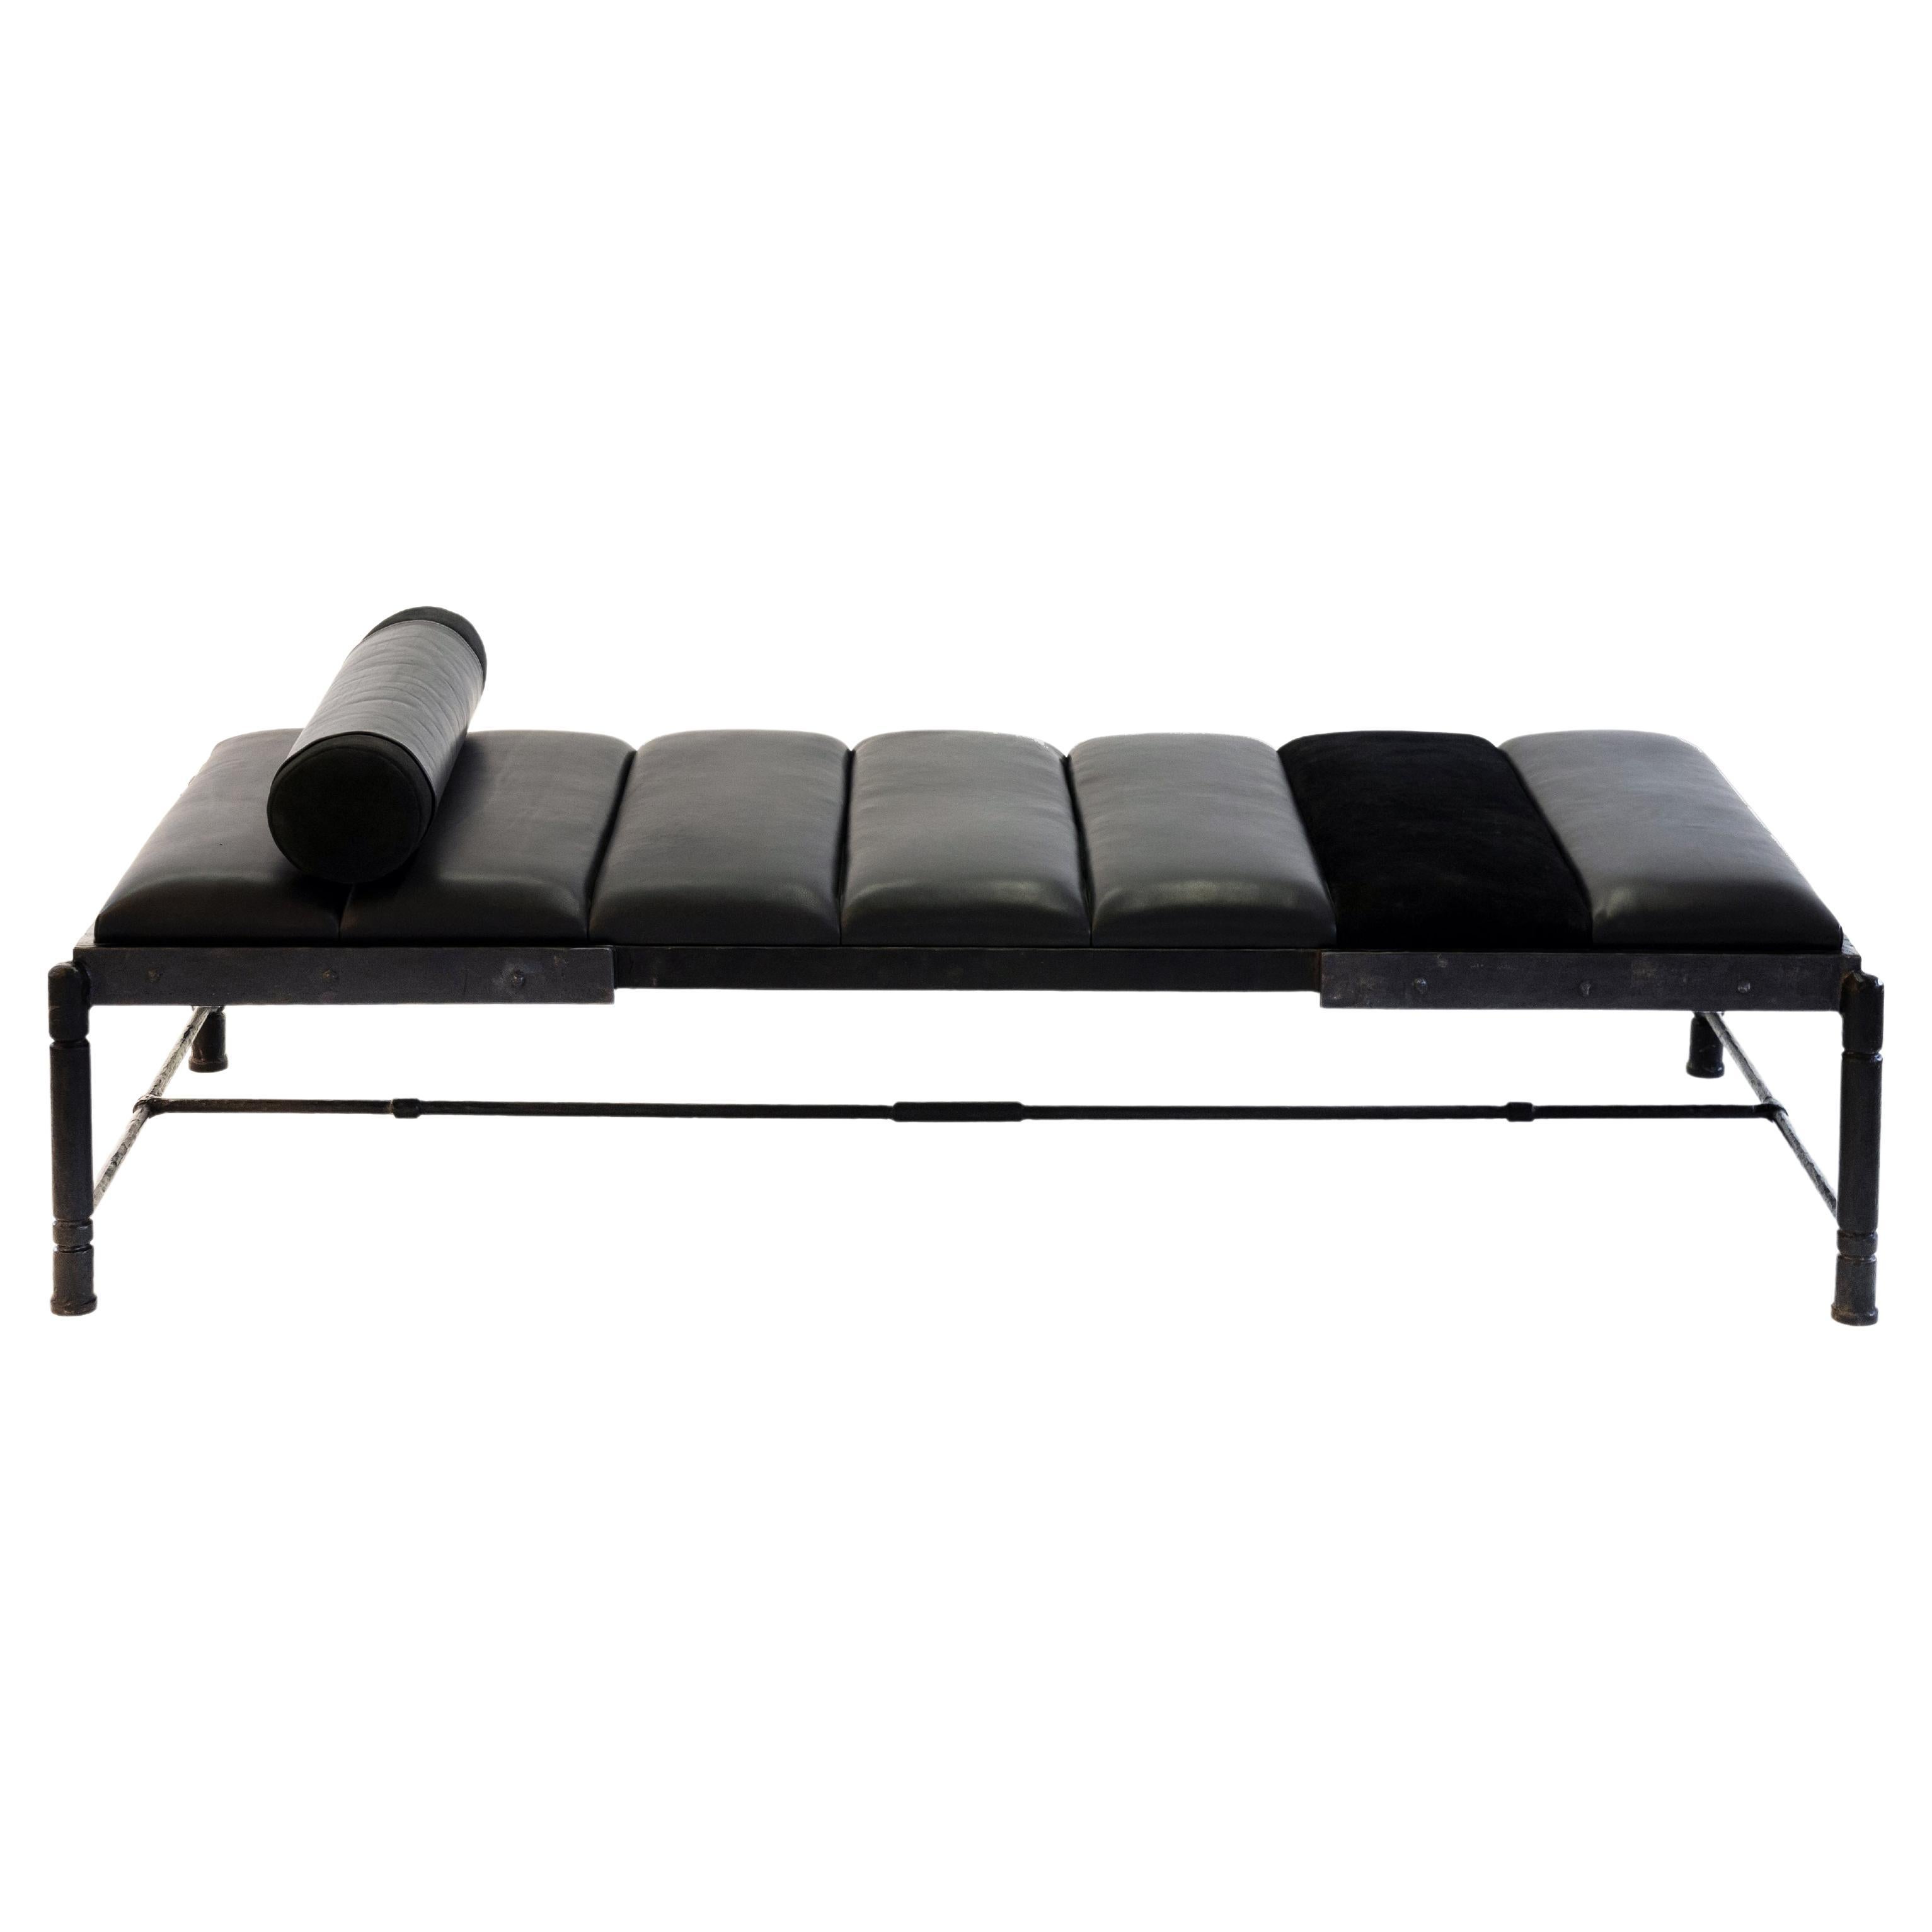 Bench/Daybed Modern/Handmade Black Leather Modern/Contemporary Waxed Steel